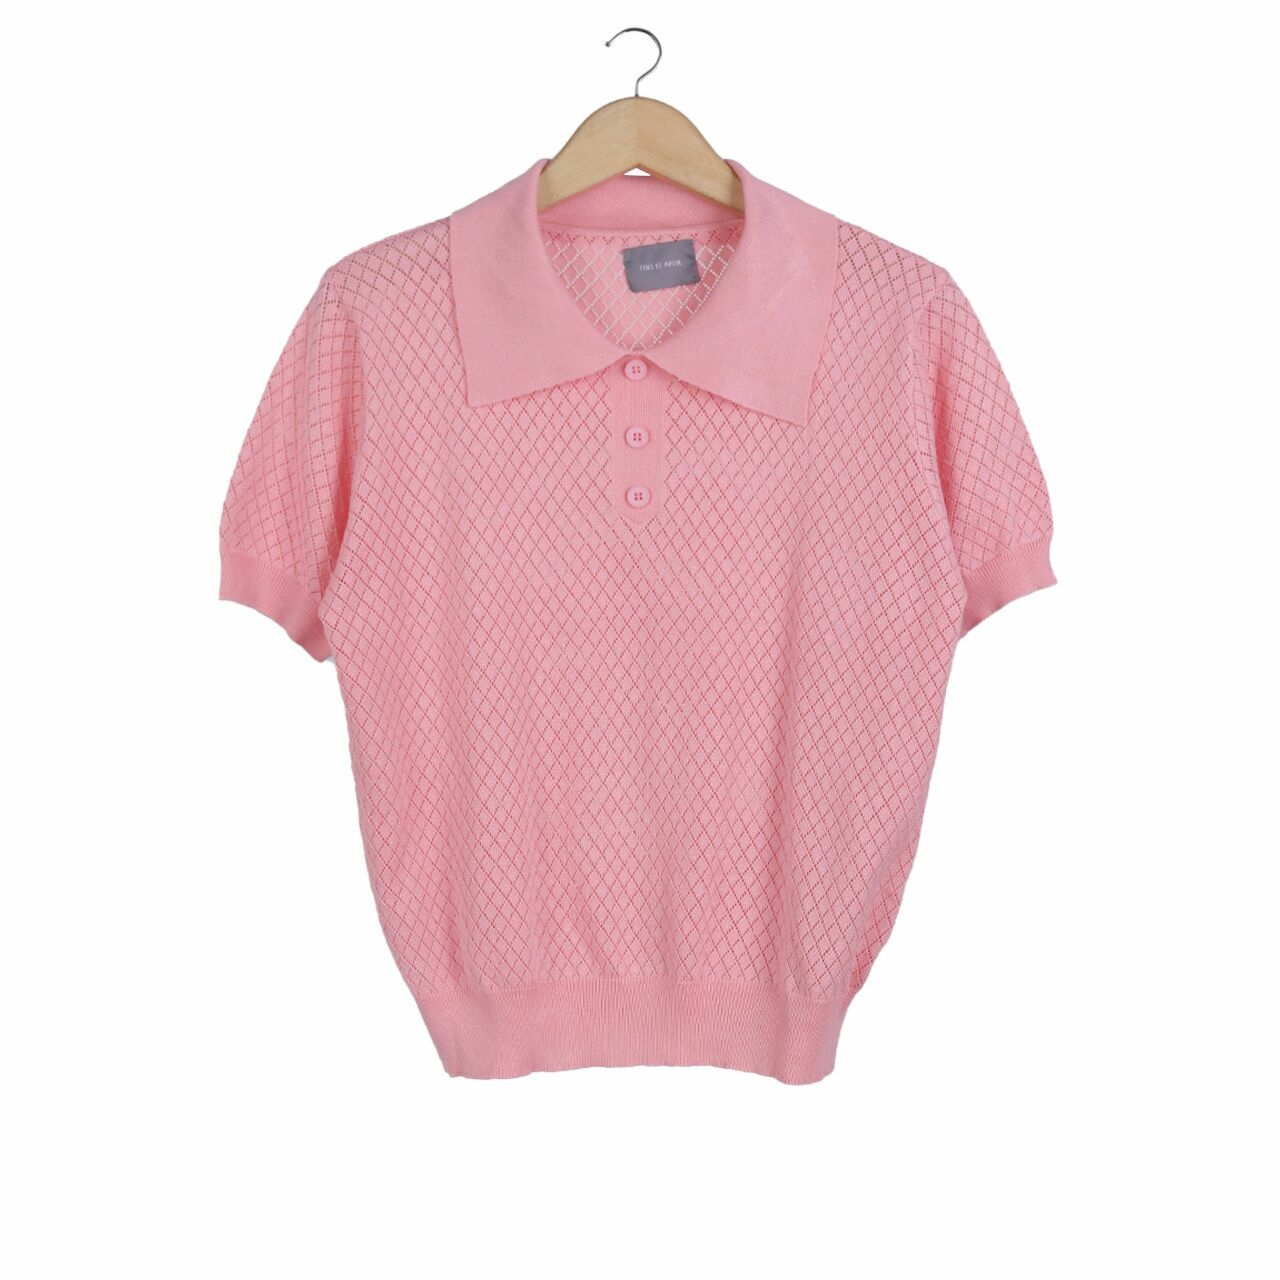 This is April Pink Blouse